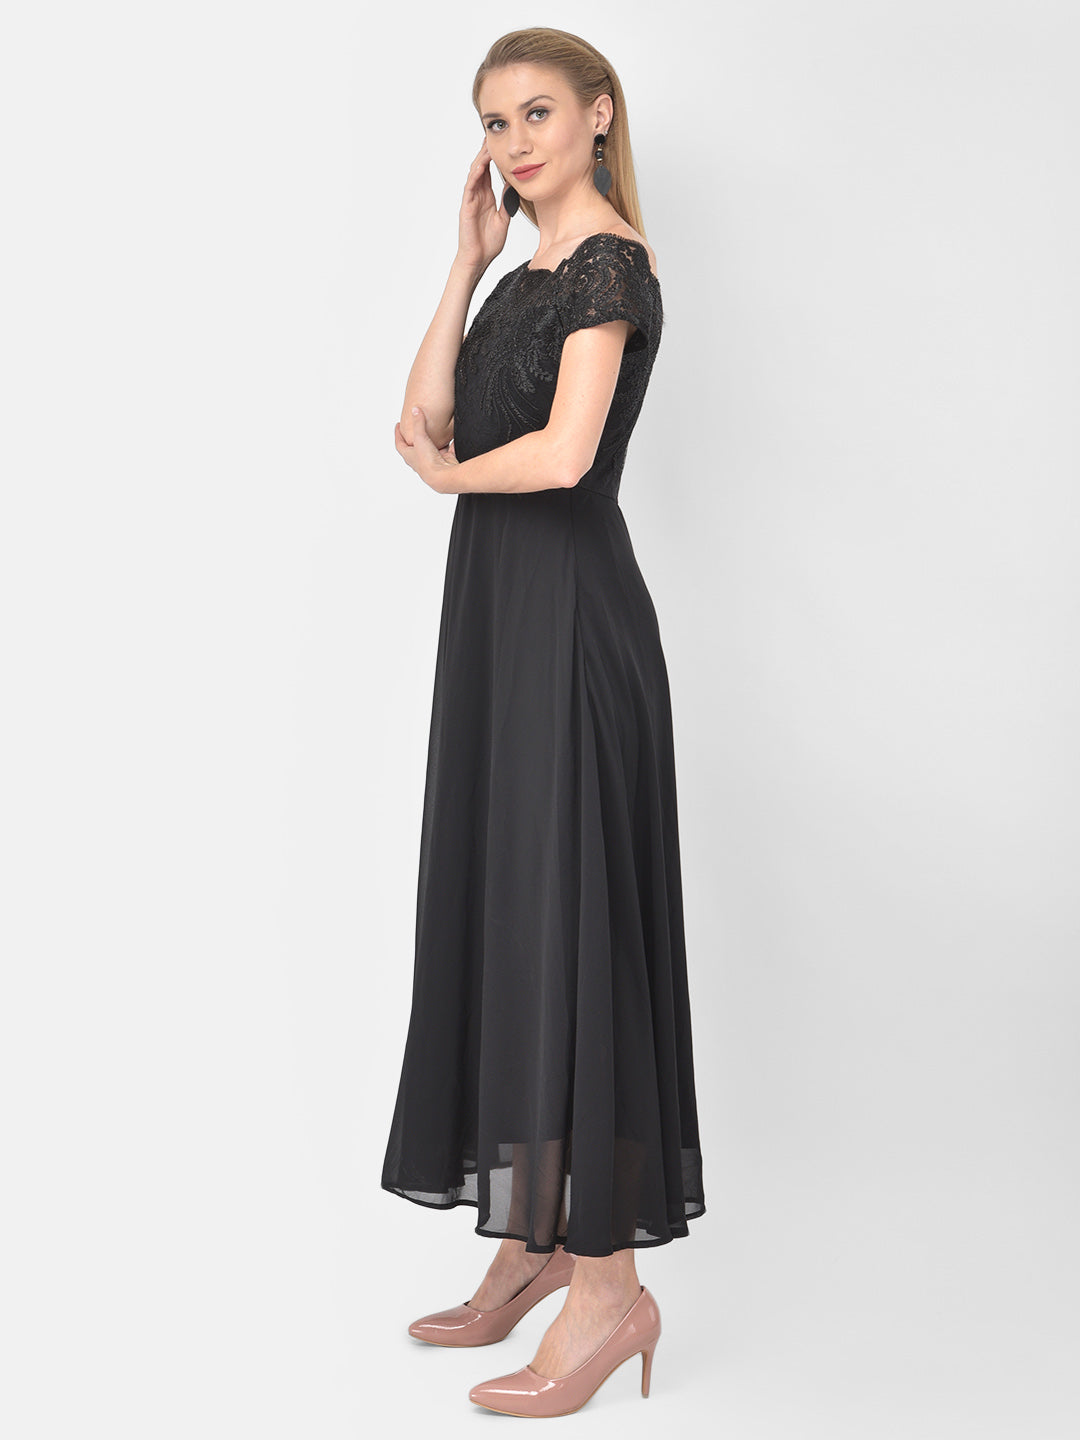 Black Cap Sleeve Maxi Dress With Lace